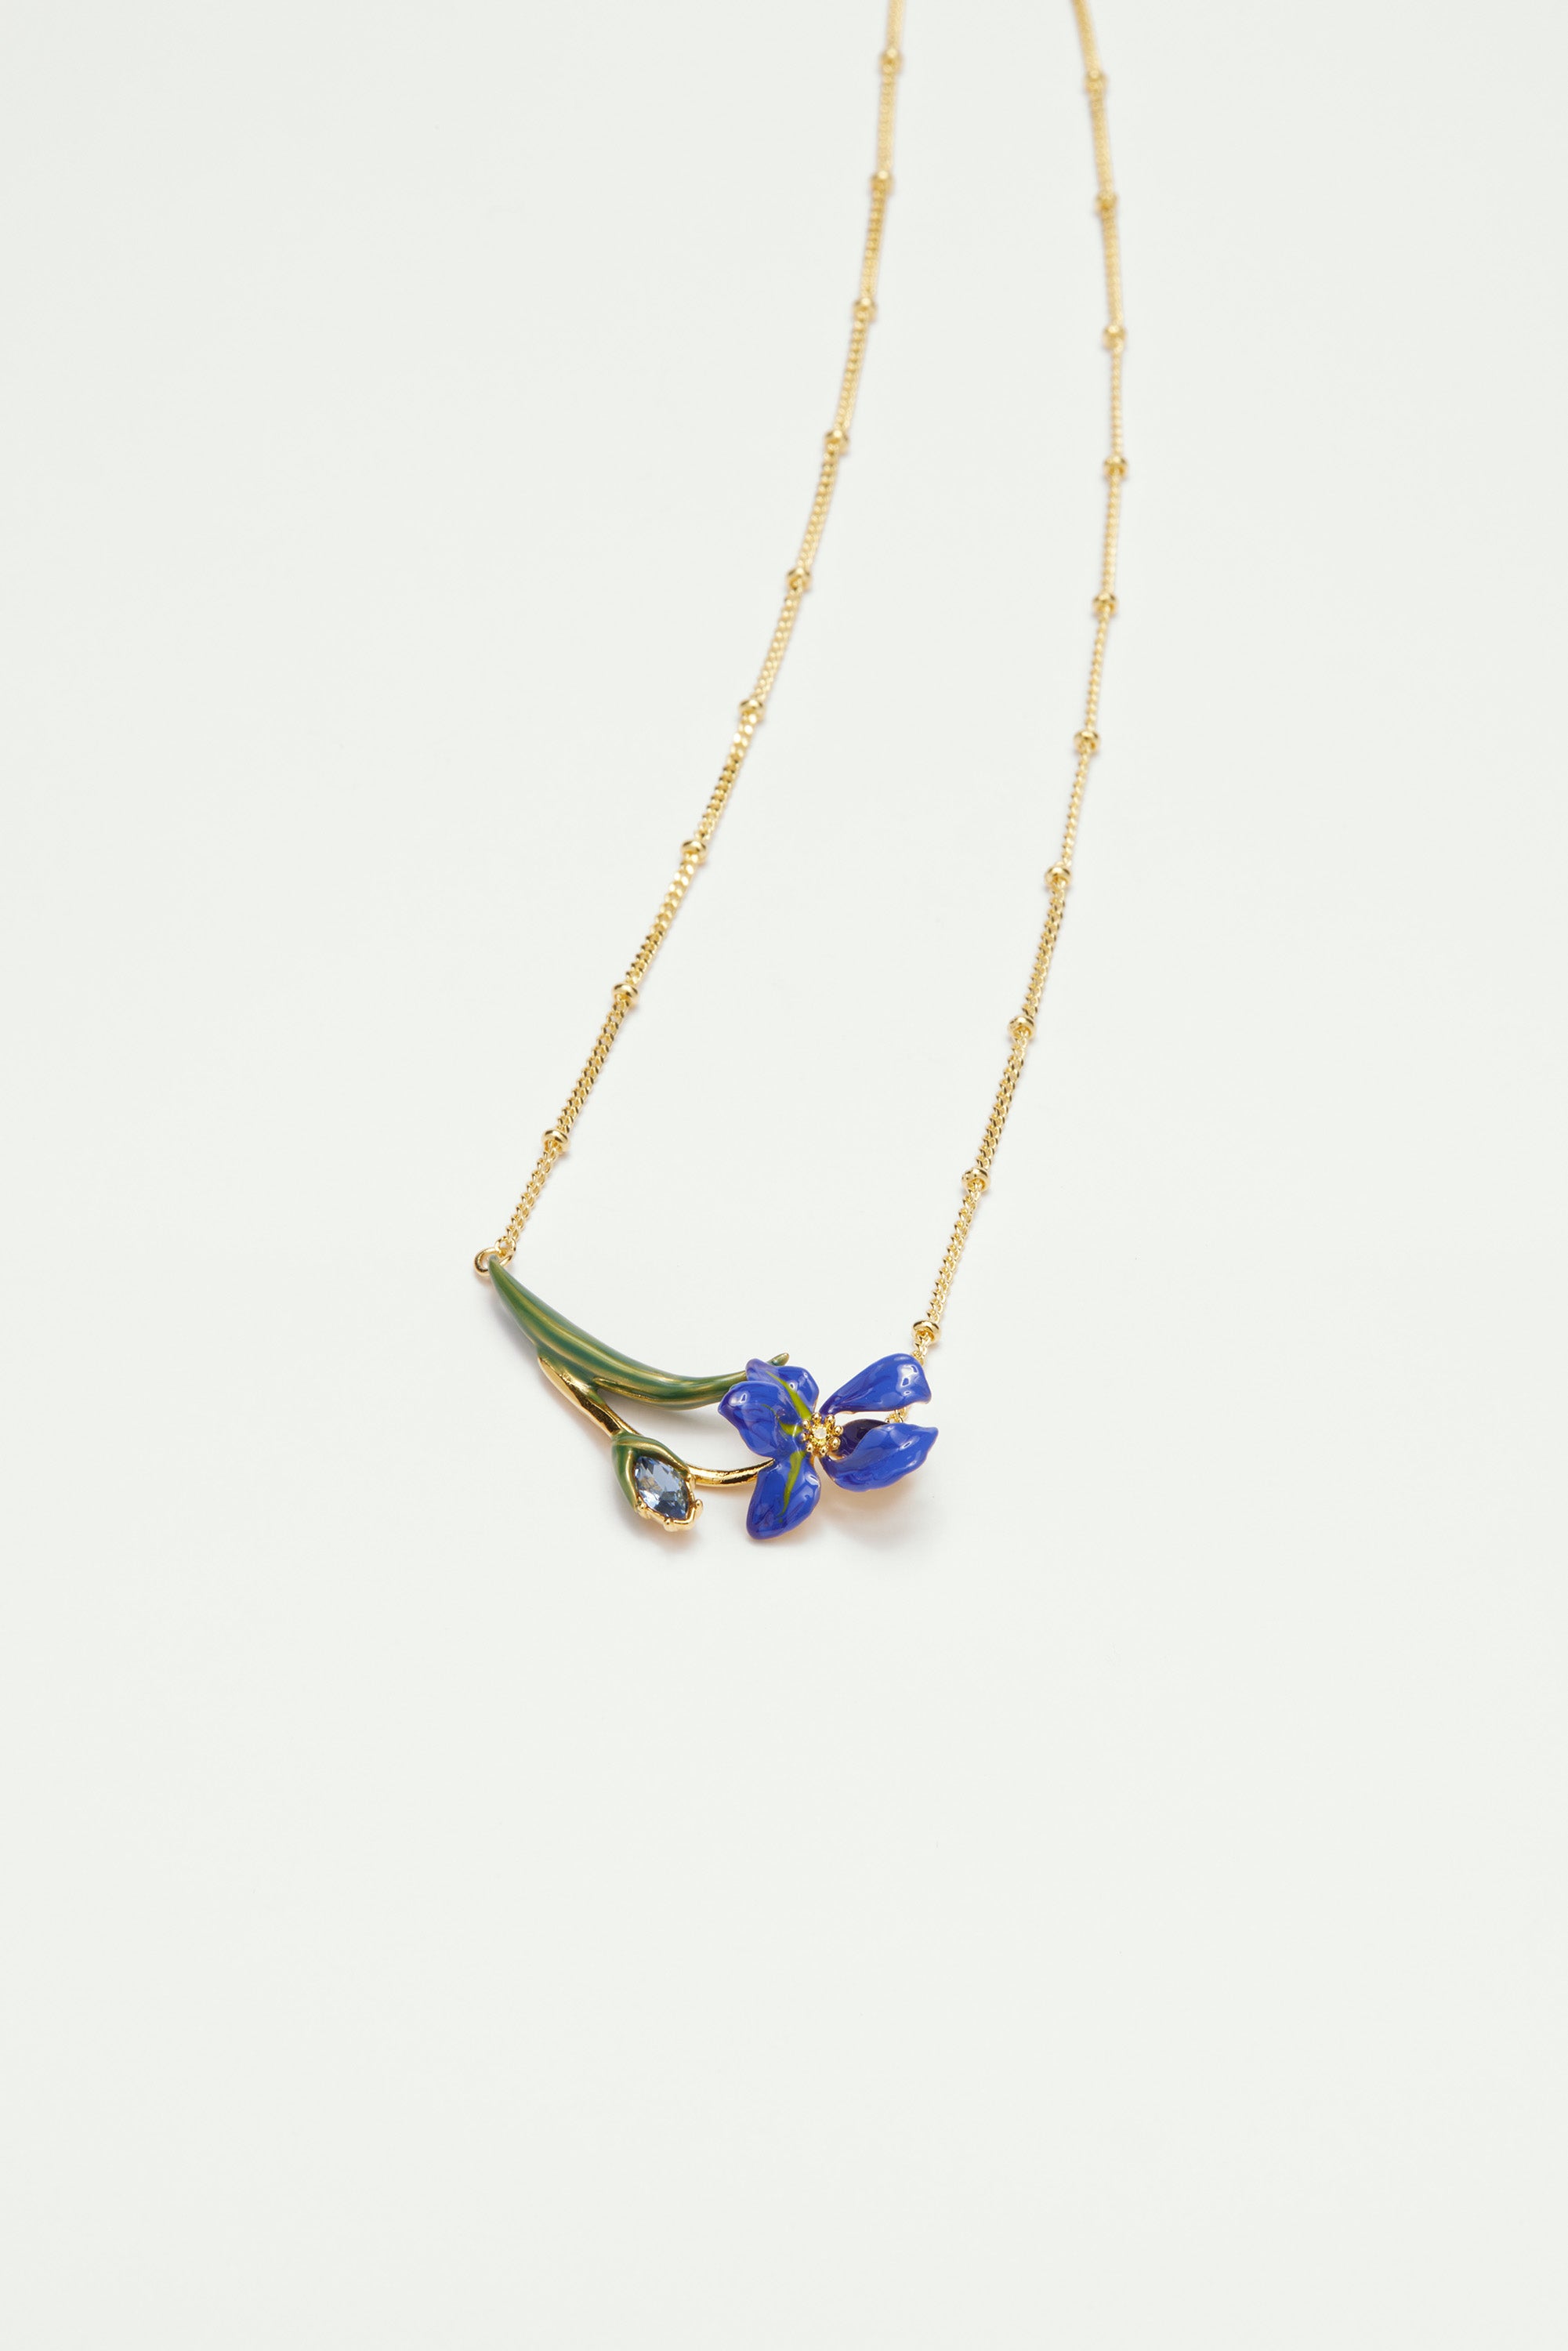 Siberian iris and faceted glass fine necklace